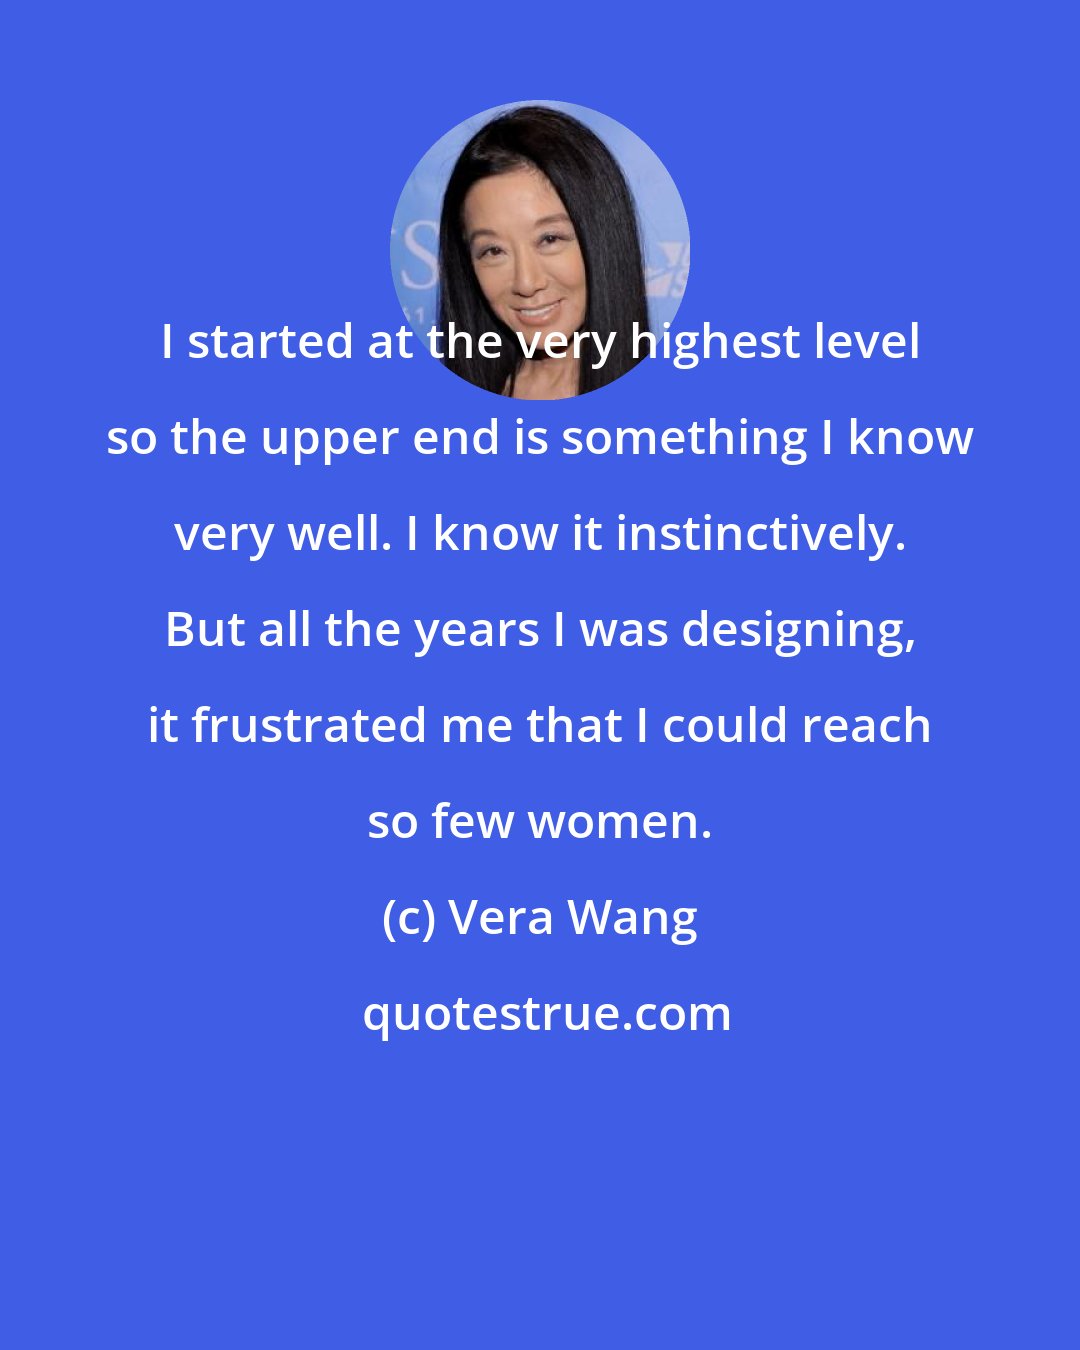 Vera Wang: I started at the very highest level so the upper end is something I know very well. I know it instinctively. But all the years I was designing, it frustrated me that I could reach so few women.